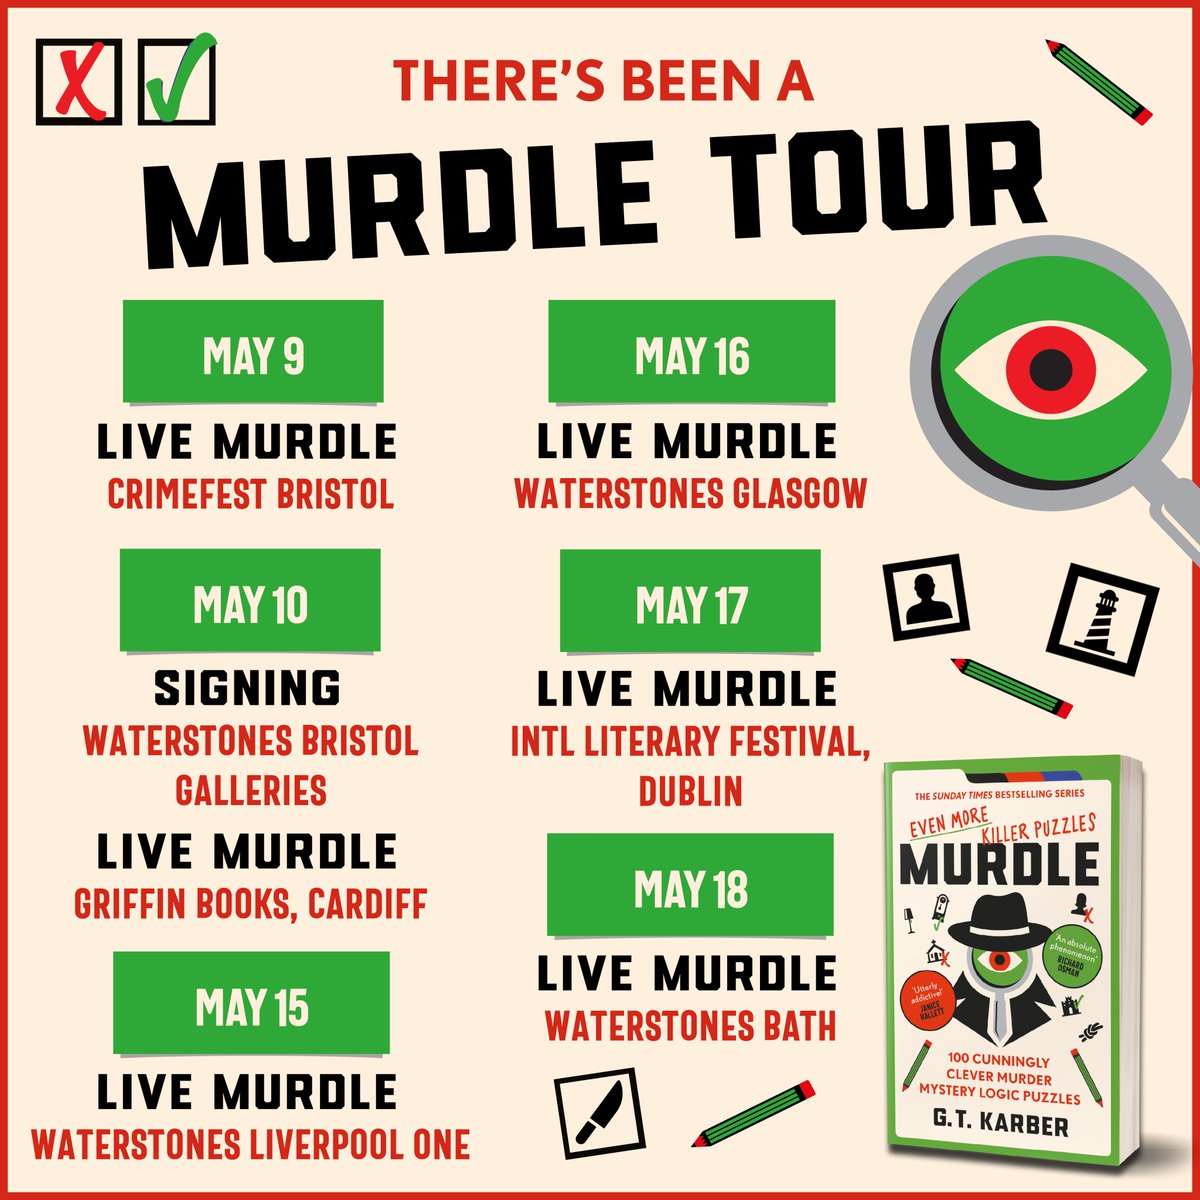 We hope your pencils are sharp and your wits even sharper - #MURDLE author @gregkarber will be touring the UK this May!✏️🔍 Get your books signed and become a true detective in a live Murdle mystery 🕵️ We hope to see you there! ✨